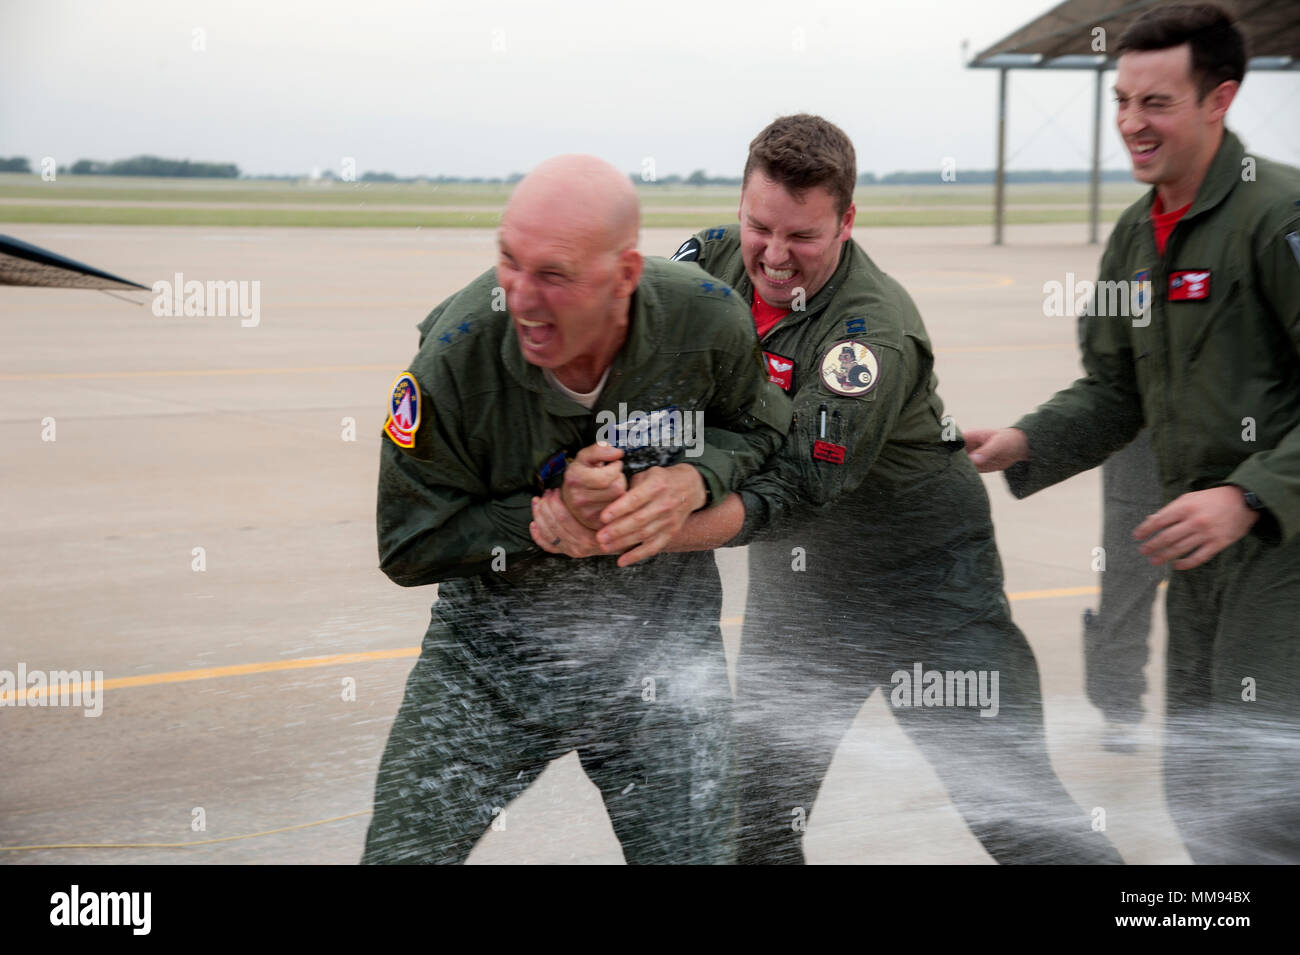 Maj. Gen. Timothy M. Zadalis, the U.S. Air Forces in Europe and Air Forces Africa vice commander, attempts to evade being sprayed with water following his “fini” flight Sept. 15, 2017 at Vance Air Force Base Okla. It is tradition, following a “fini” flight, to spray the pilot with water after they exit the aircraft. Zadalis is a graduate of Vance Undergraduate Pilot Training Class 85-04. (U.S. Air Force photo by Airman Zachary Heal) Stock Photo